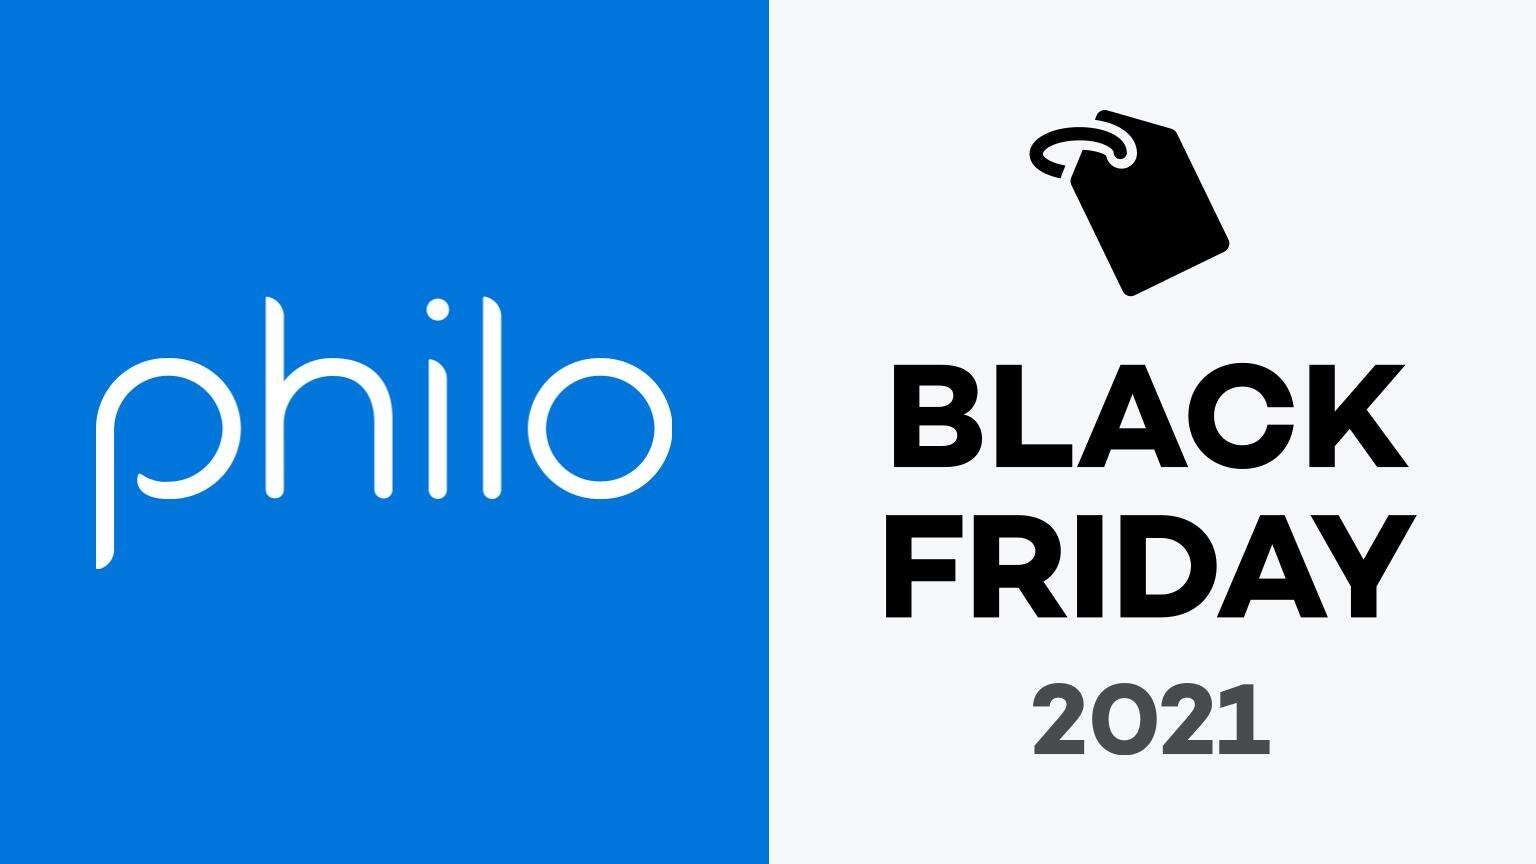 Philo Black Friday 2021 Deals and Sales What Are the Best Ways to